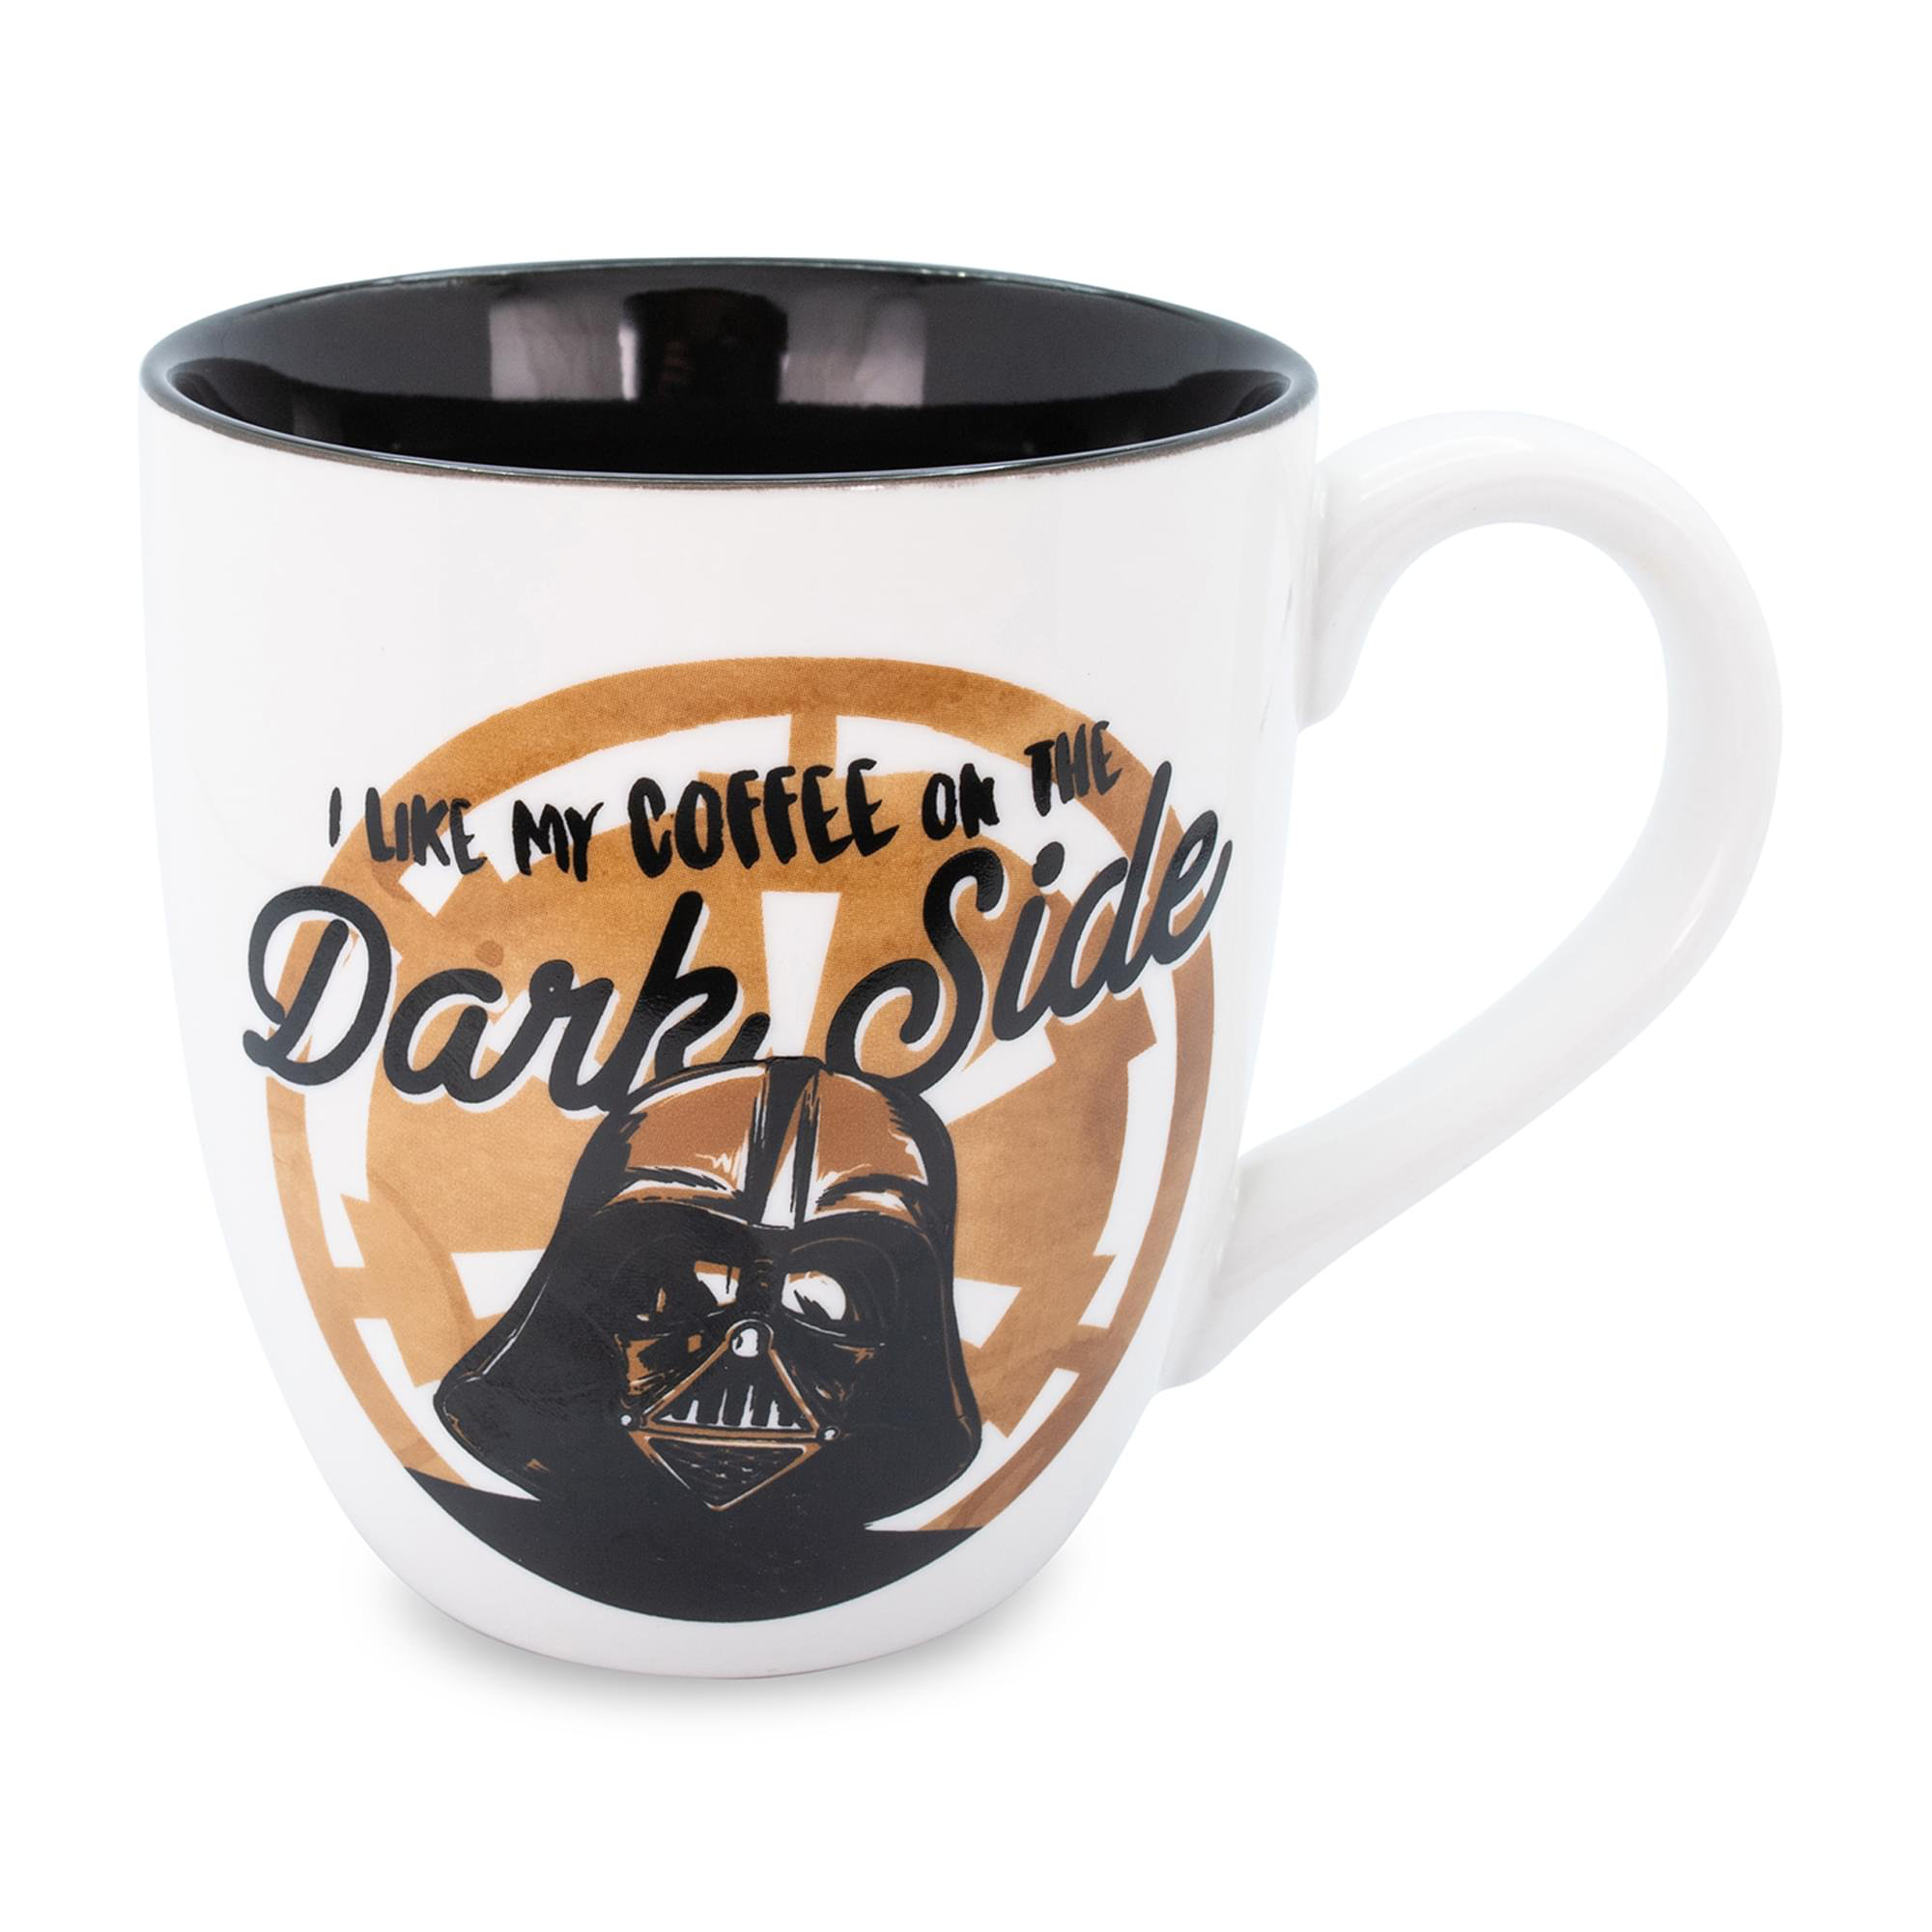 Star Wars Darth Vader The Force Is Strong Ceramic Shot Glass